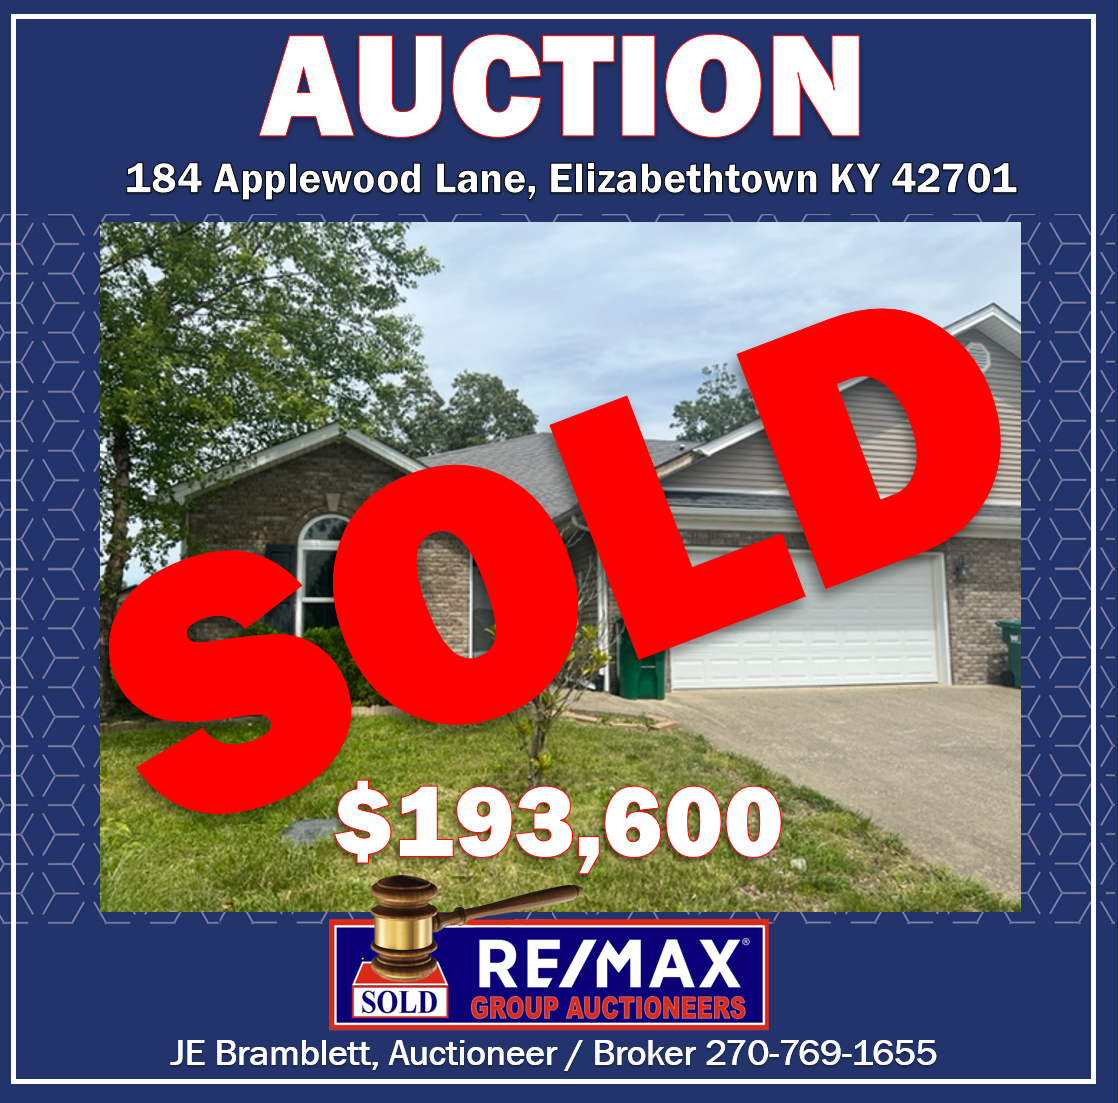 Absolute Auction | Elizabethtown | Saturday, July 22nd @ 10:00AM EDT